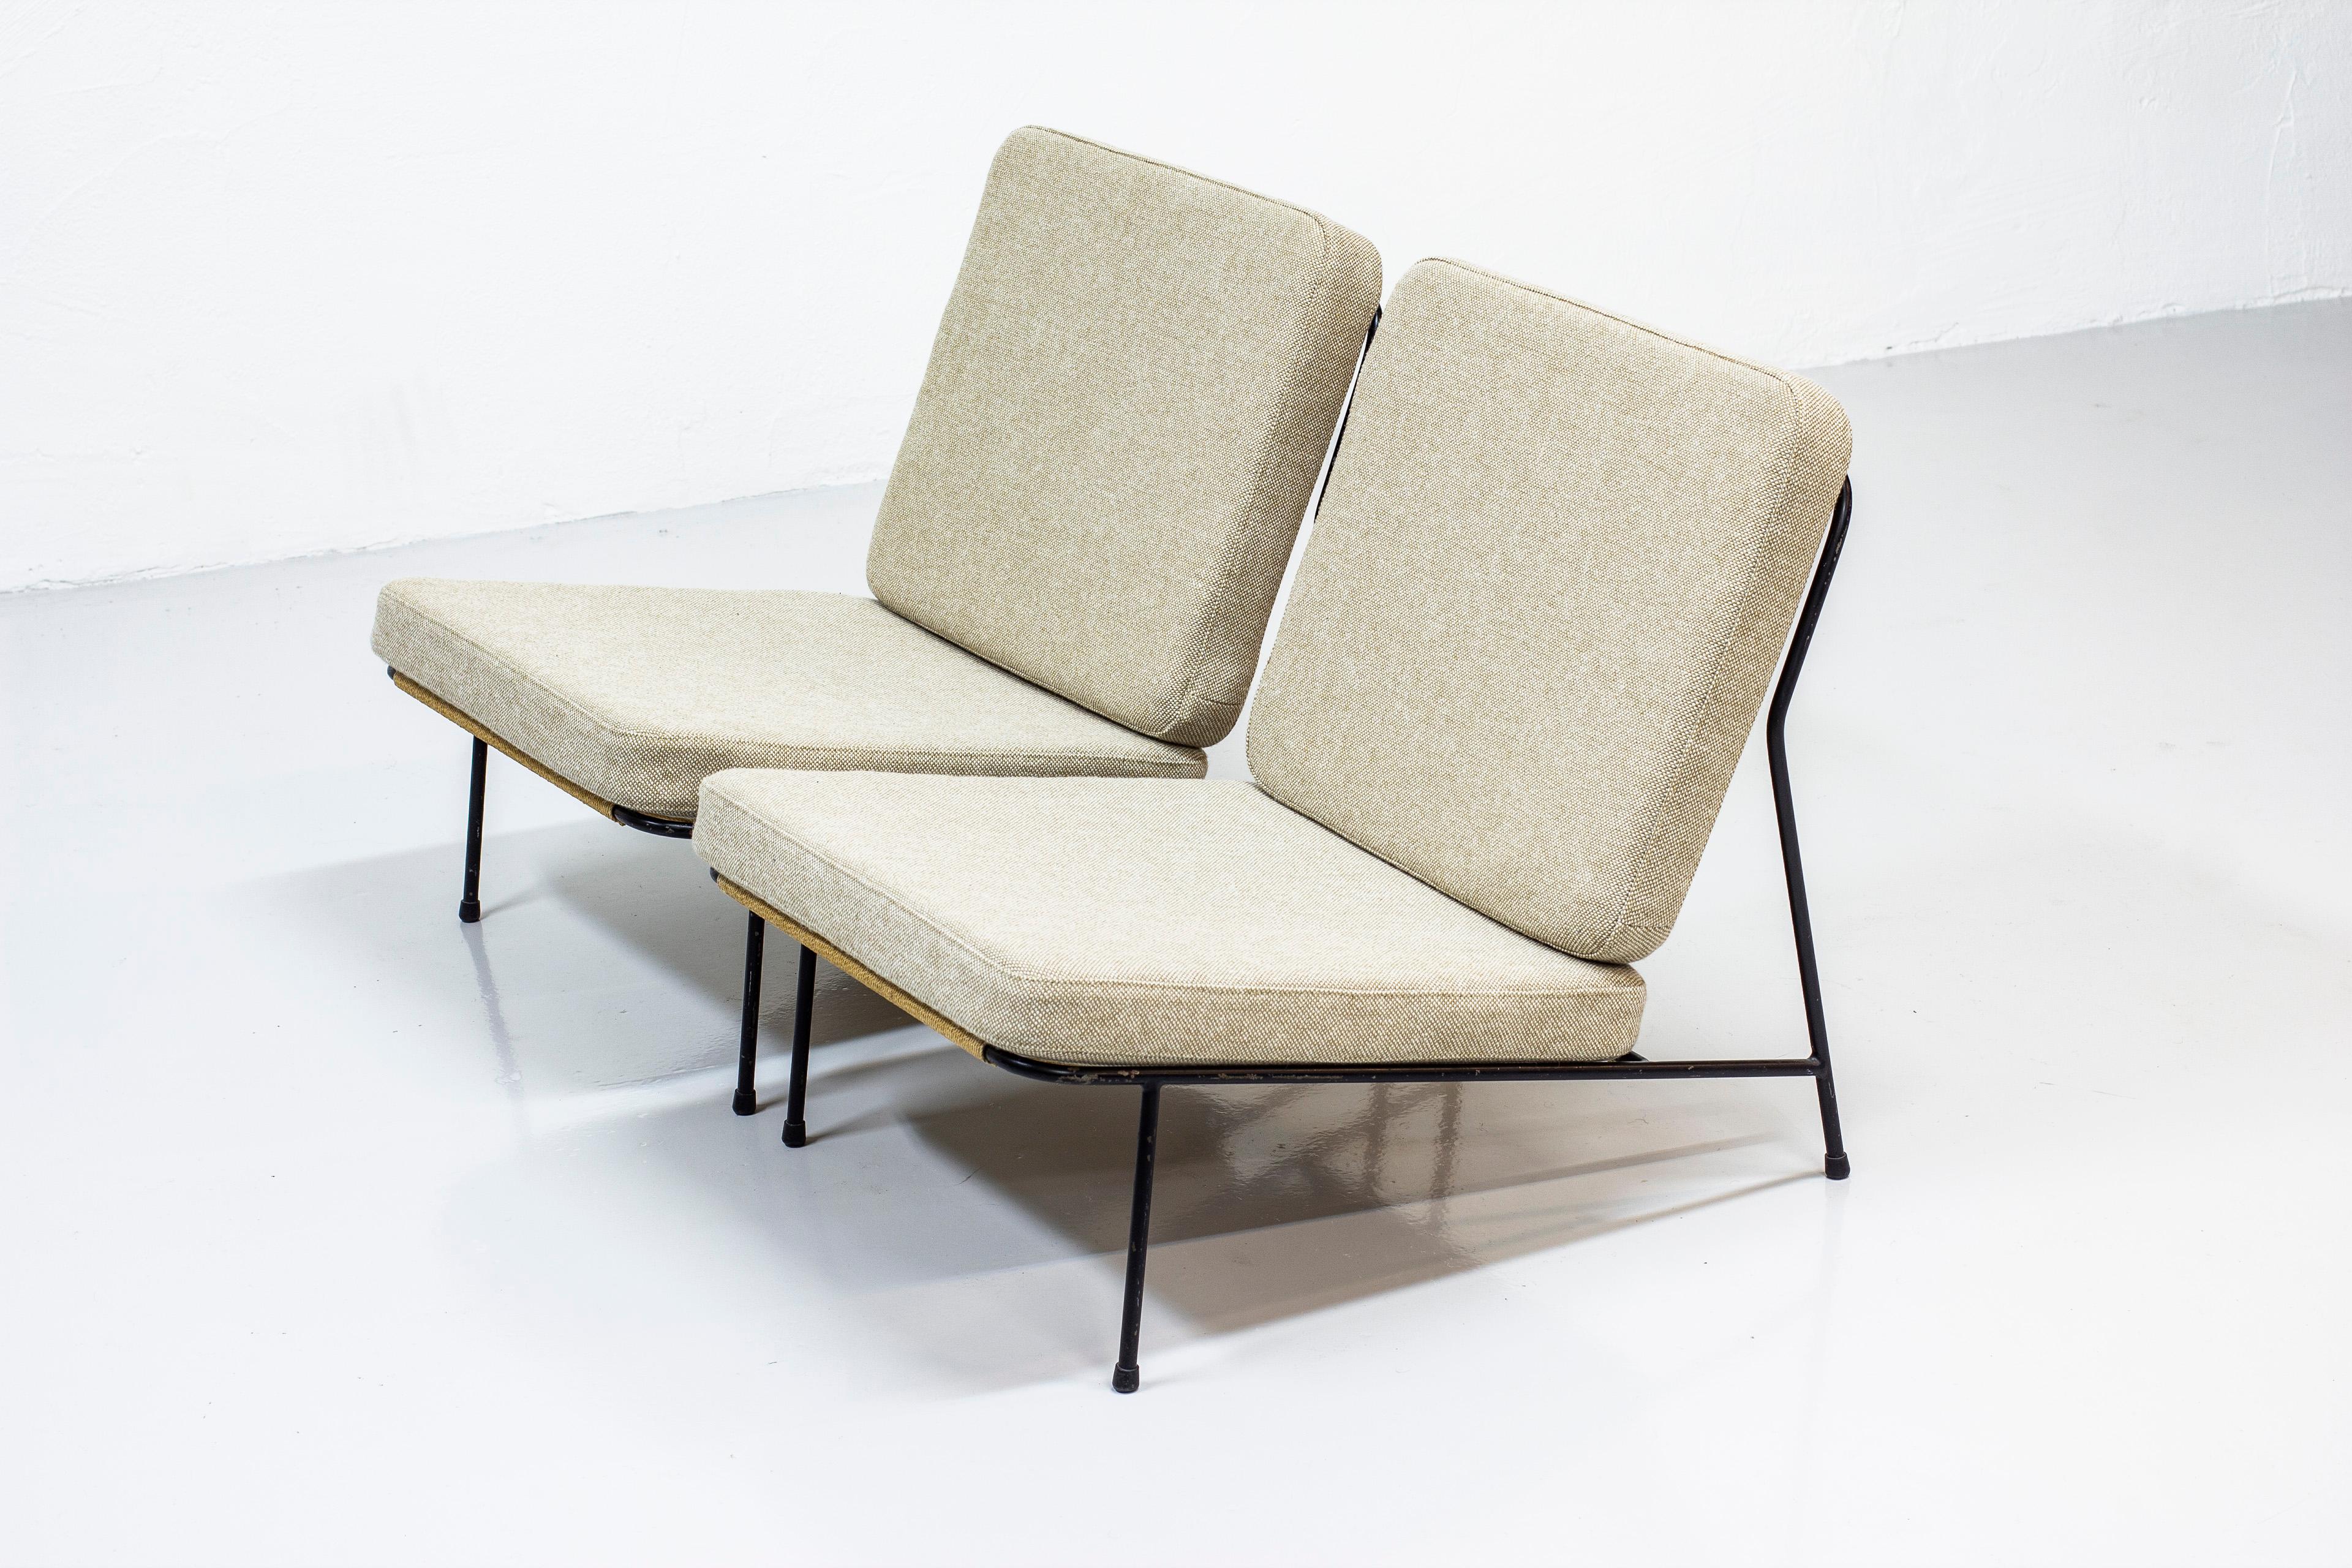 Scandinavian Modern Lounge Chairs by Alf Svensson for Ljungs Industrier, Sweden, Midcentury, 1950s For Sale